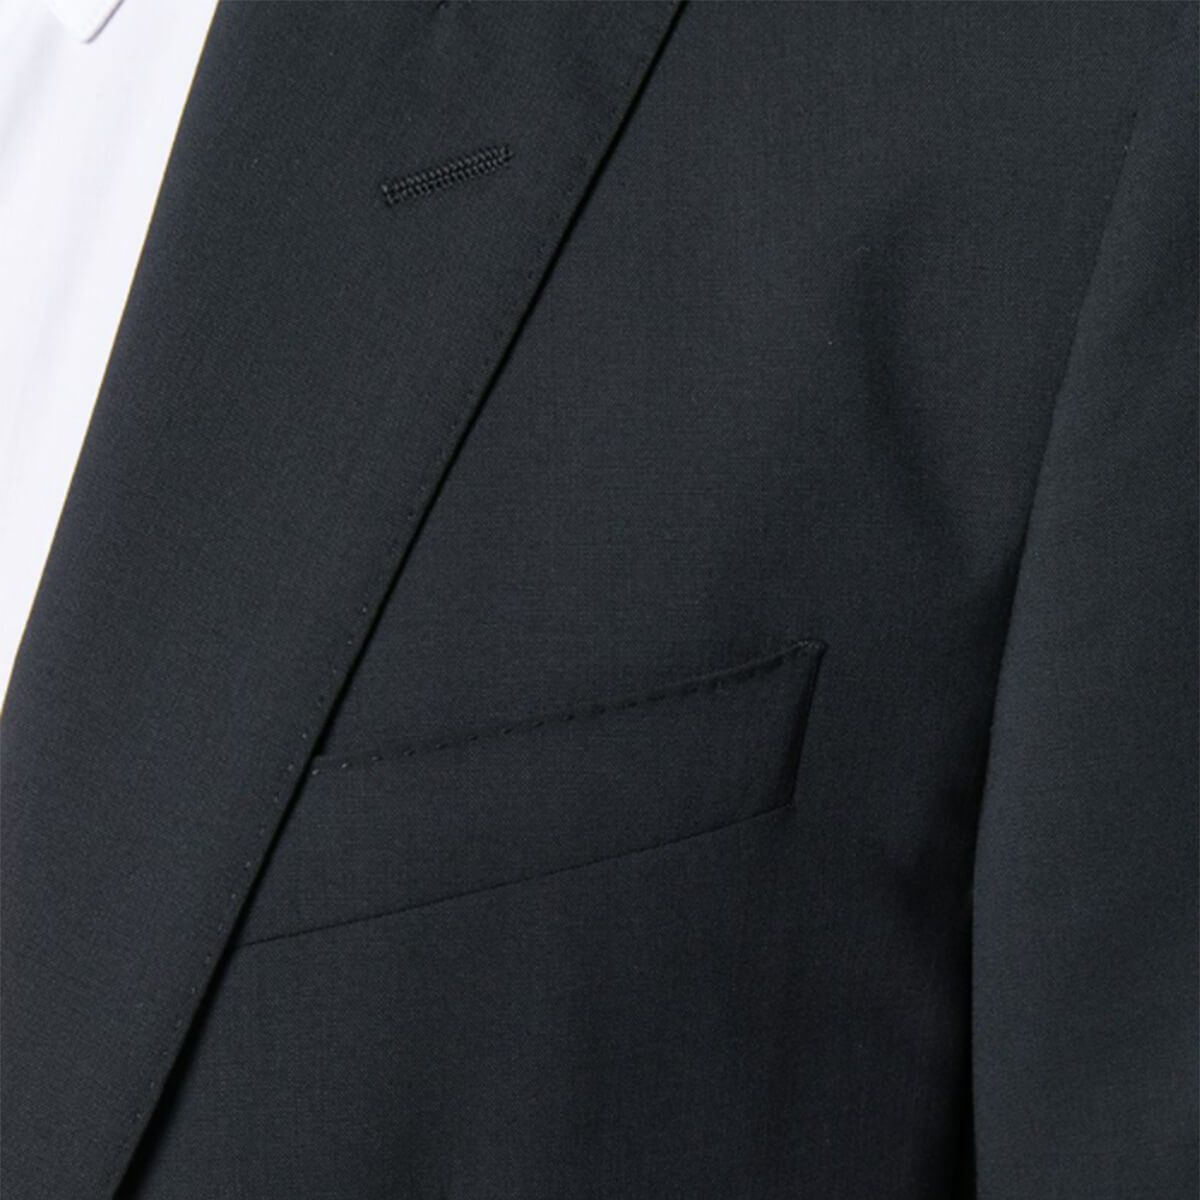 Fitted Formal Suit